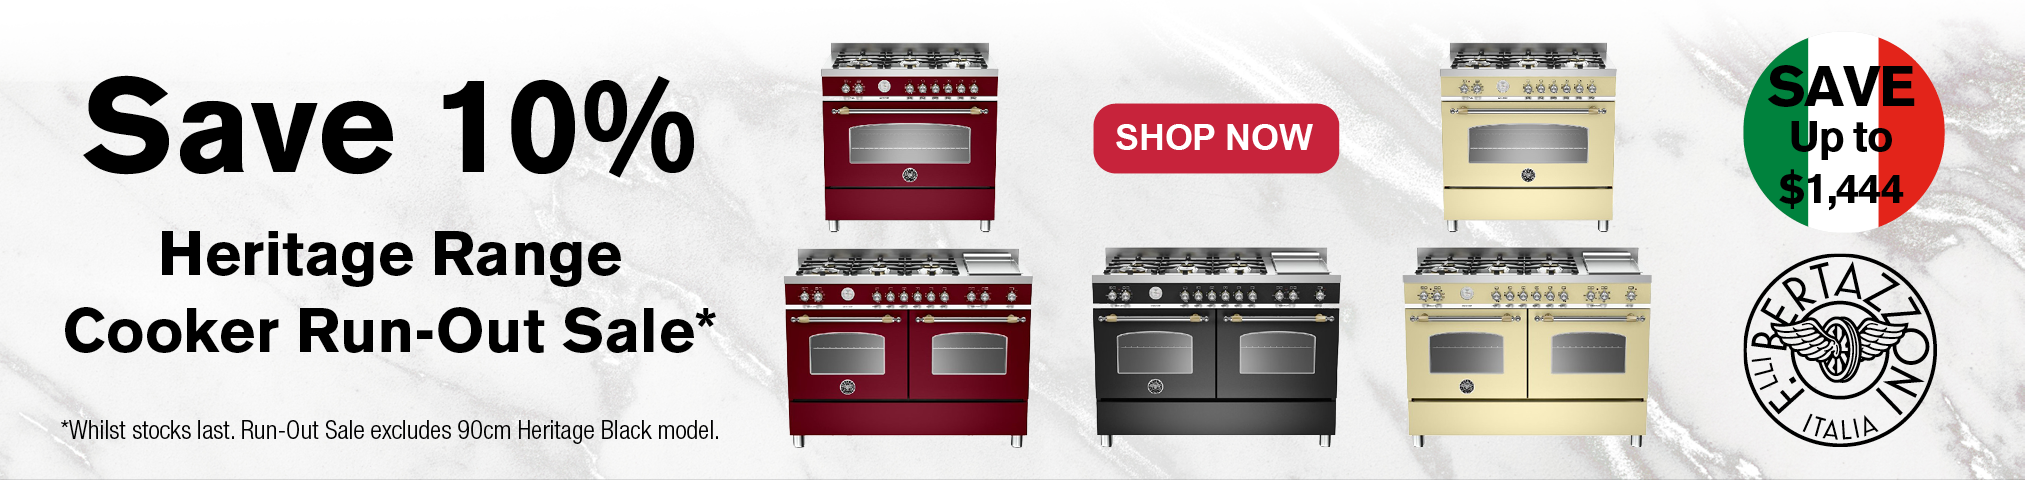 Purchase Selected Bertazzoni Heritage or 90cm or 120cm Upright Cooker & Save 10%*